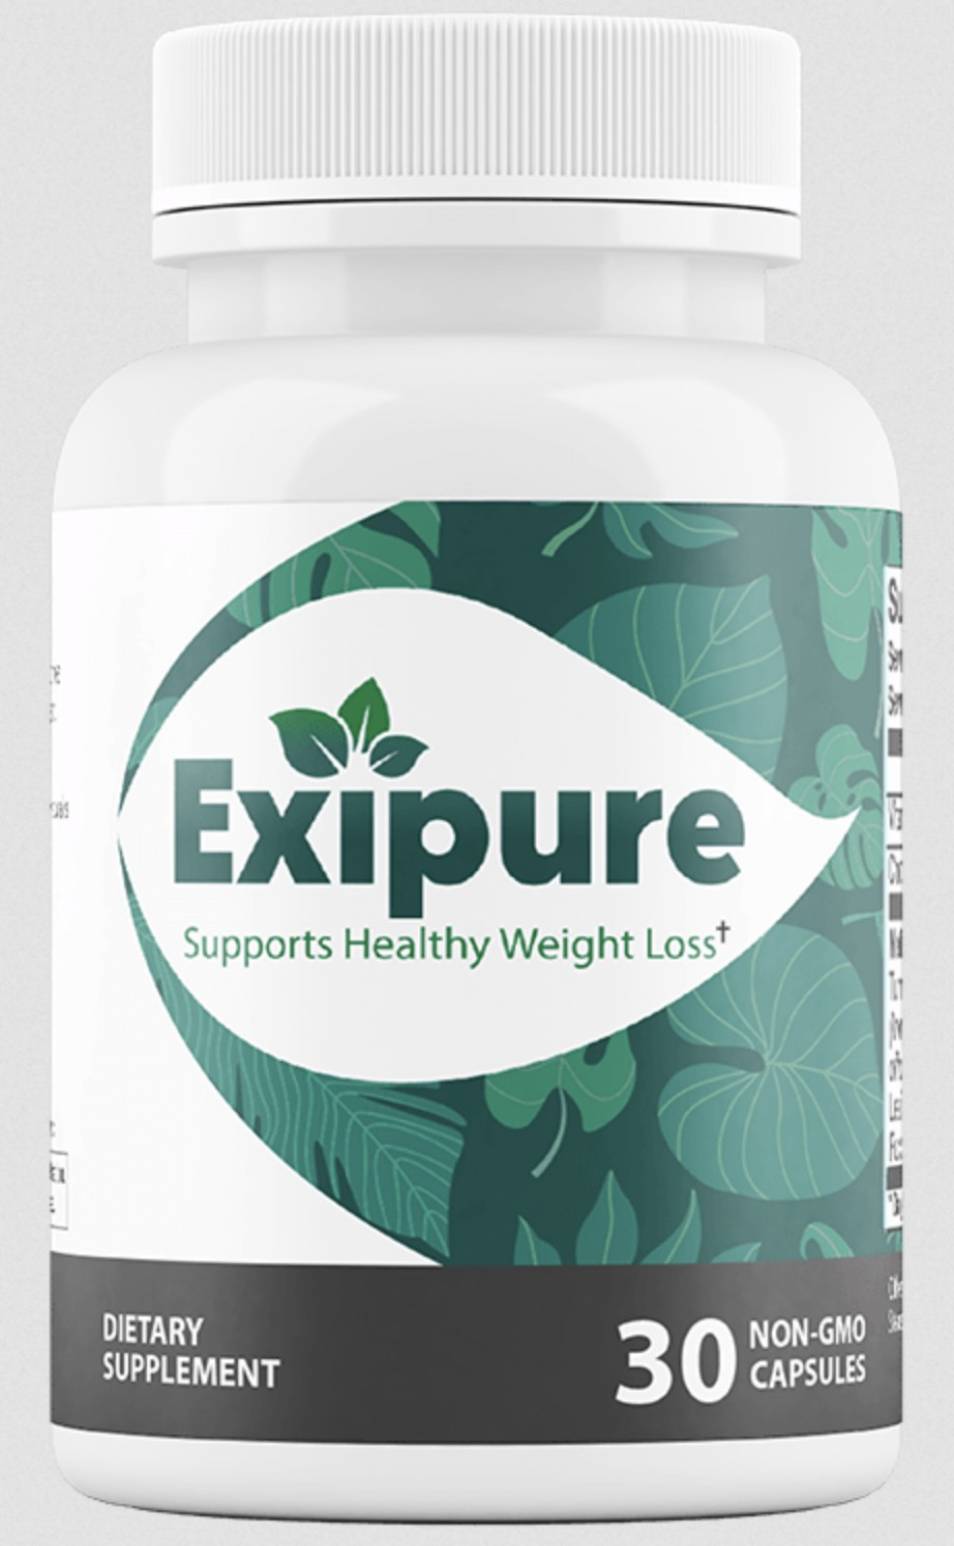 Exipure Good For You